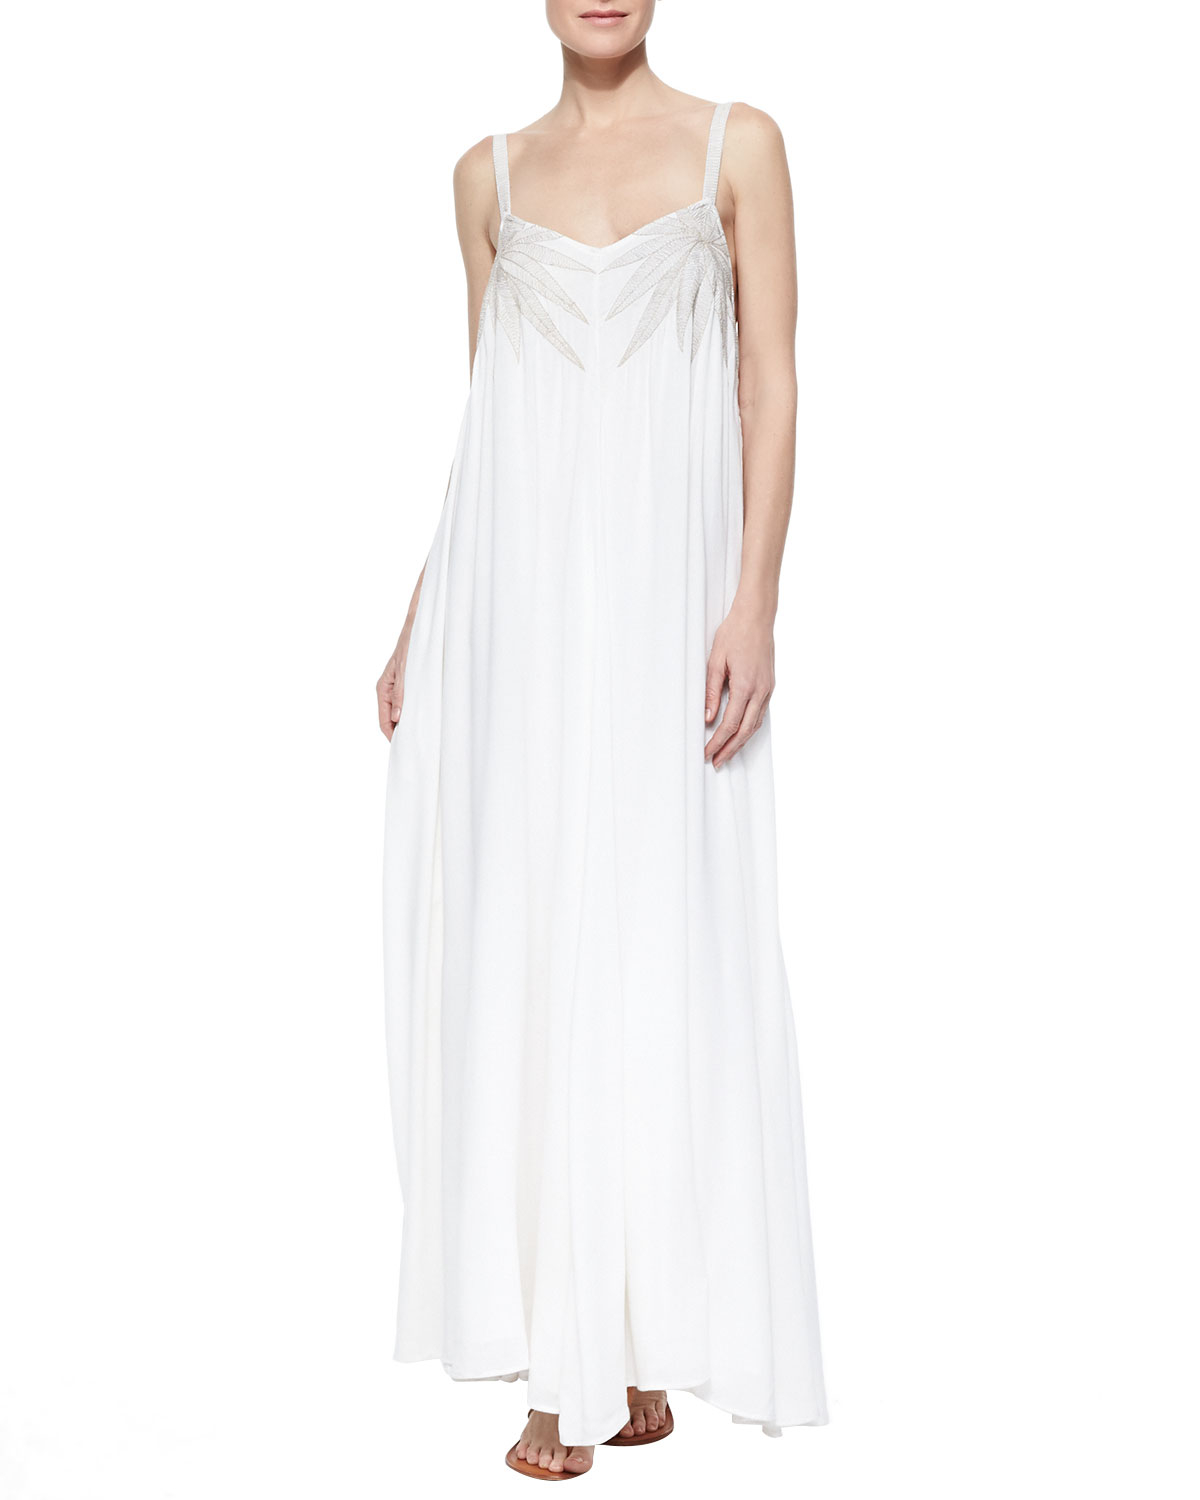 Mara Hoffman Embroidered Gauze Maxi Dress in White | Lyst